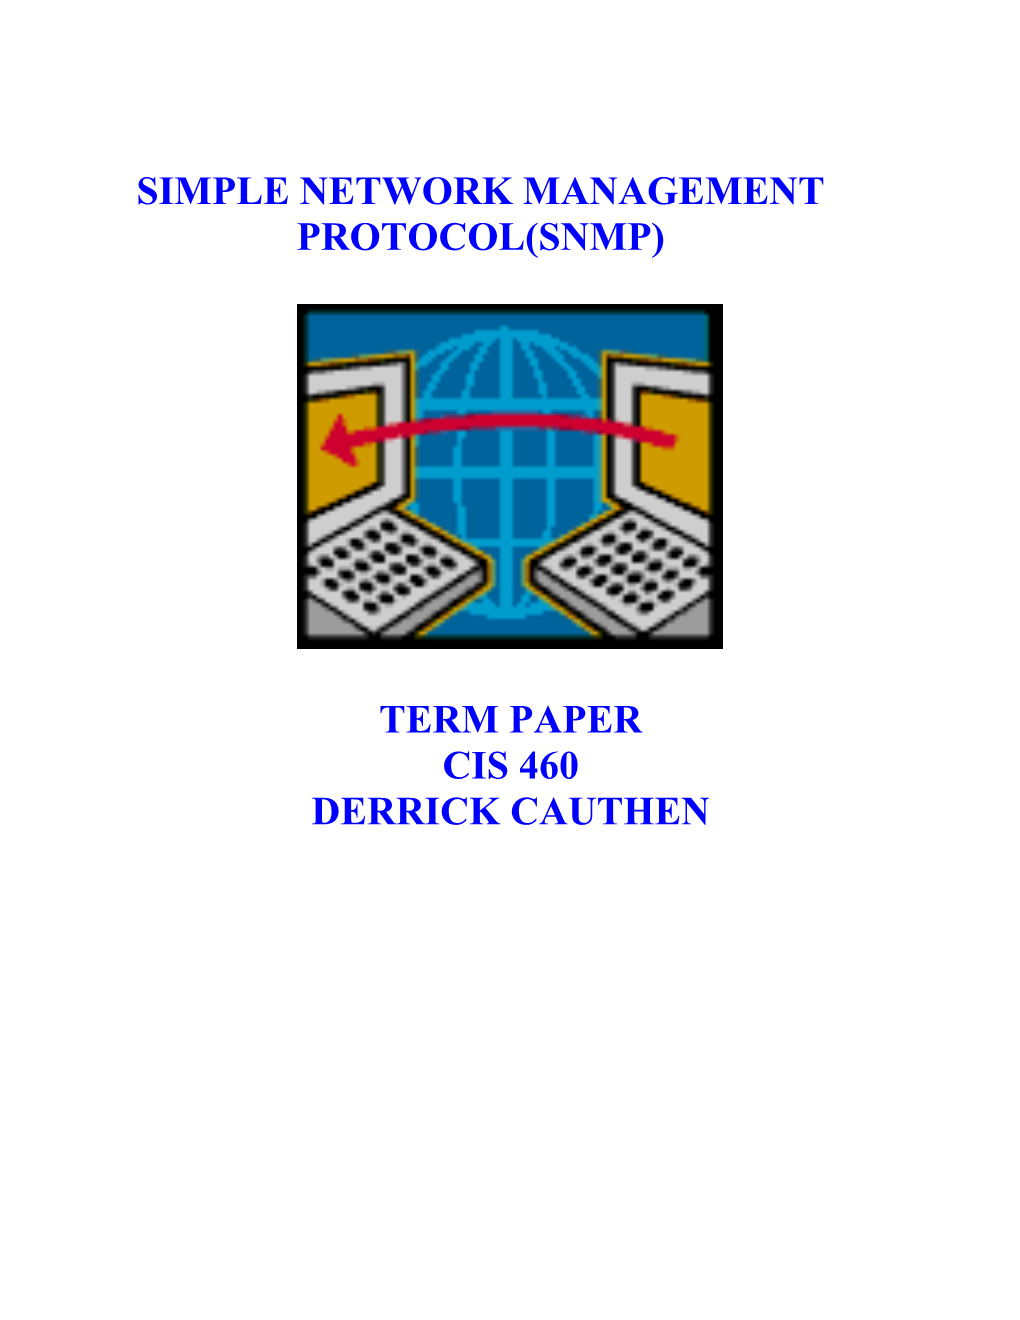 Simple Network Management Protocol(SNMP) Is Simply Define As an Application Layer Protocol